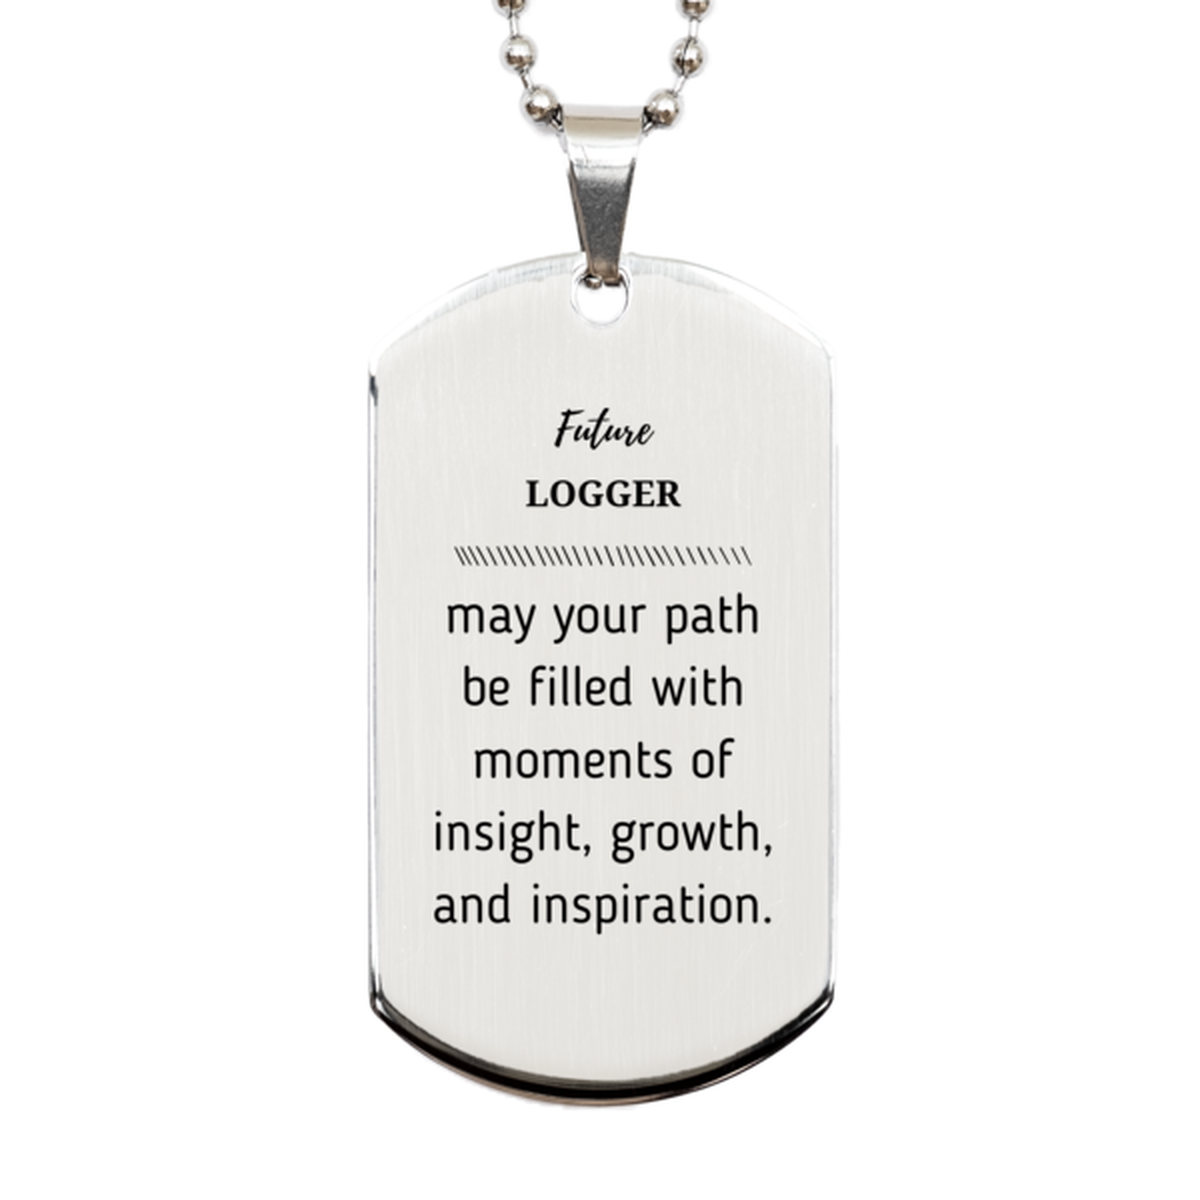 Future Logger Gifts, May your path be filled with moments of insight, Graduation Gifts for New Logger, Christmas Unique Silver Dog Tag For Men, Women, Friends